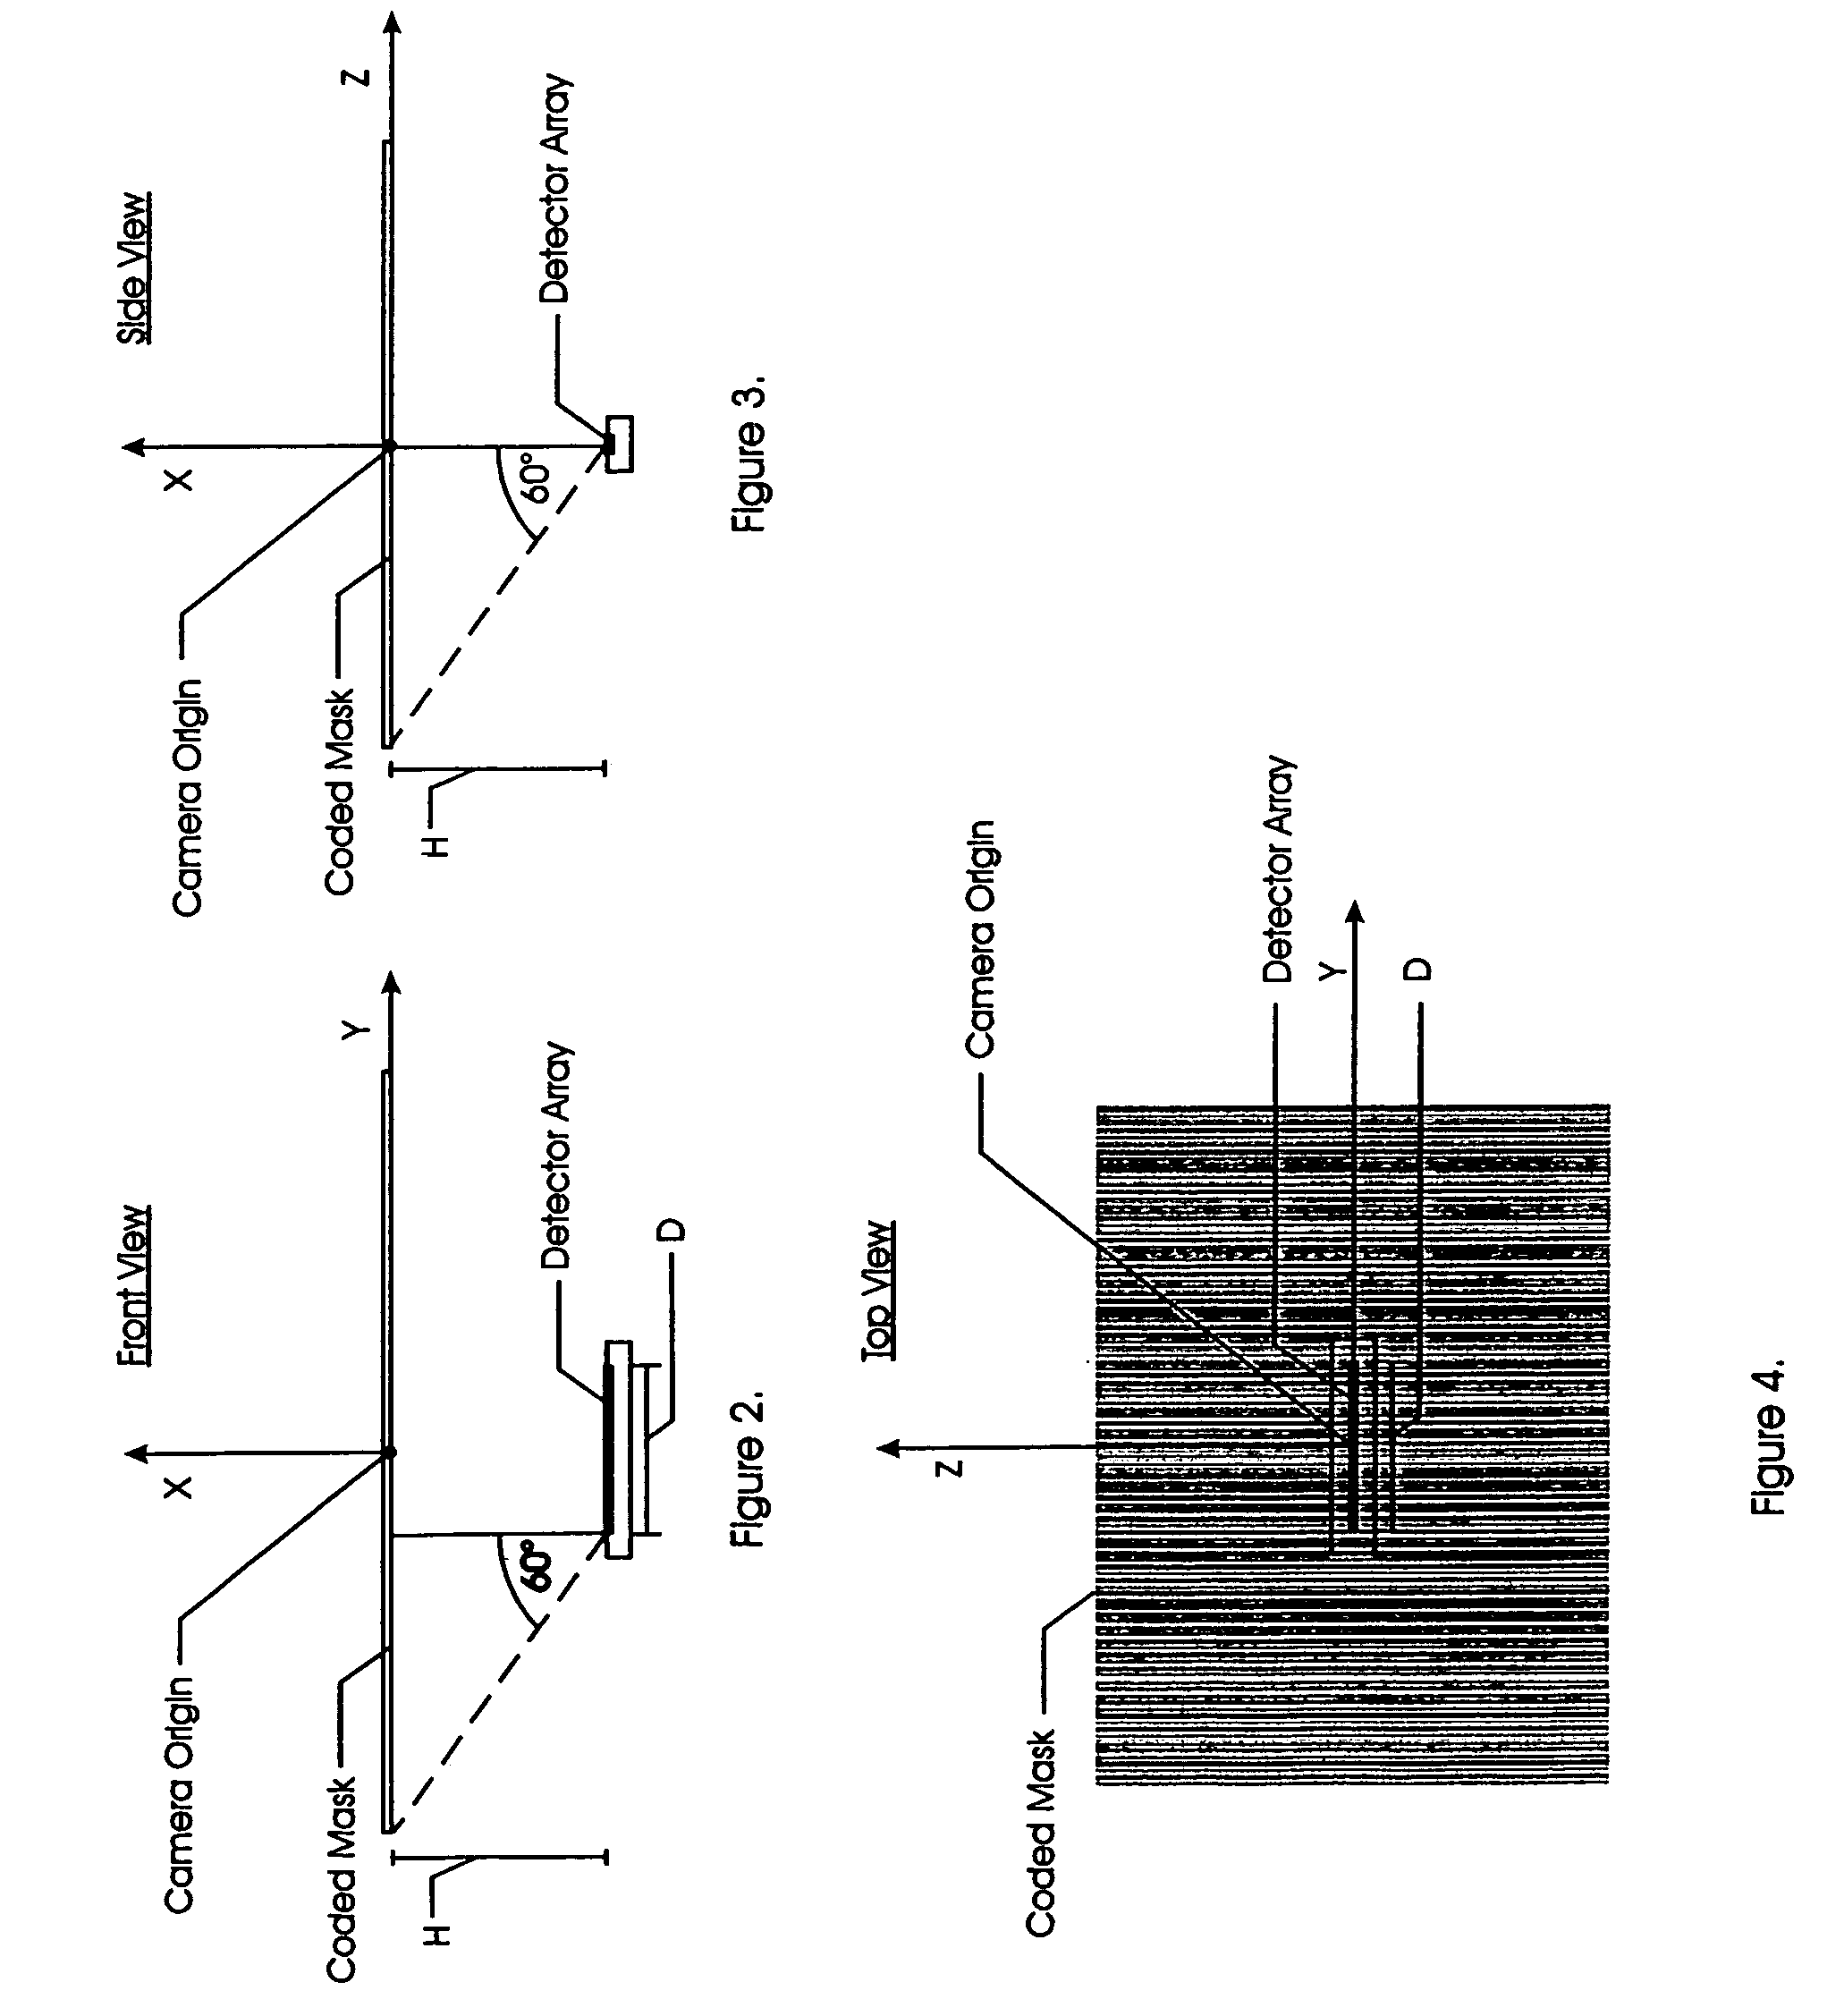 Optical system for determining the angular position of a radiating point source and method of employing